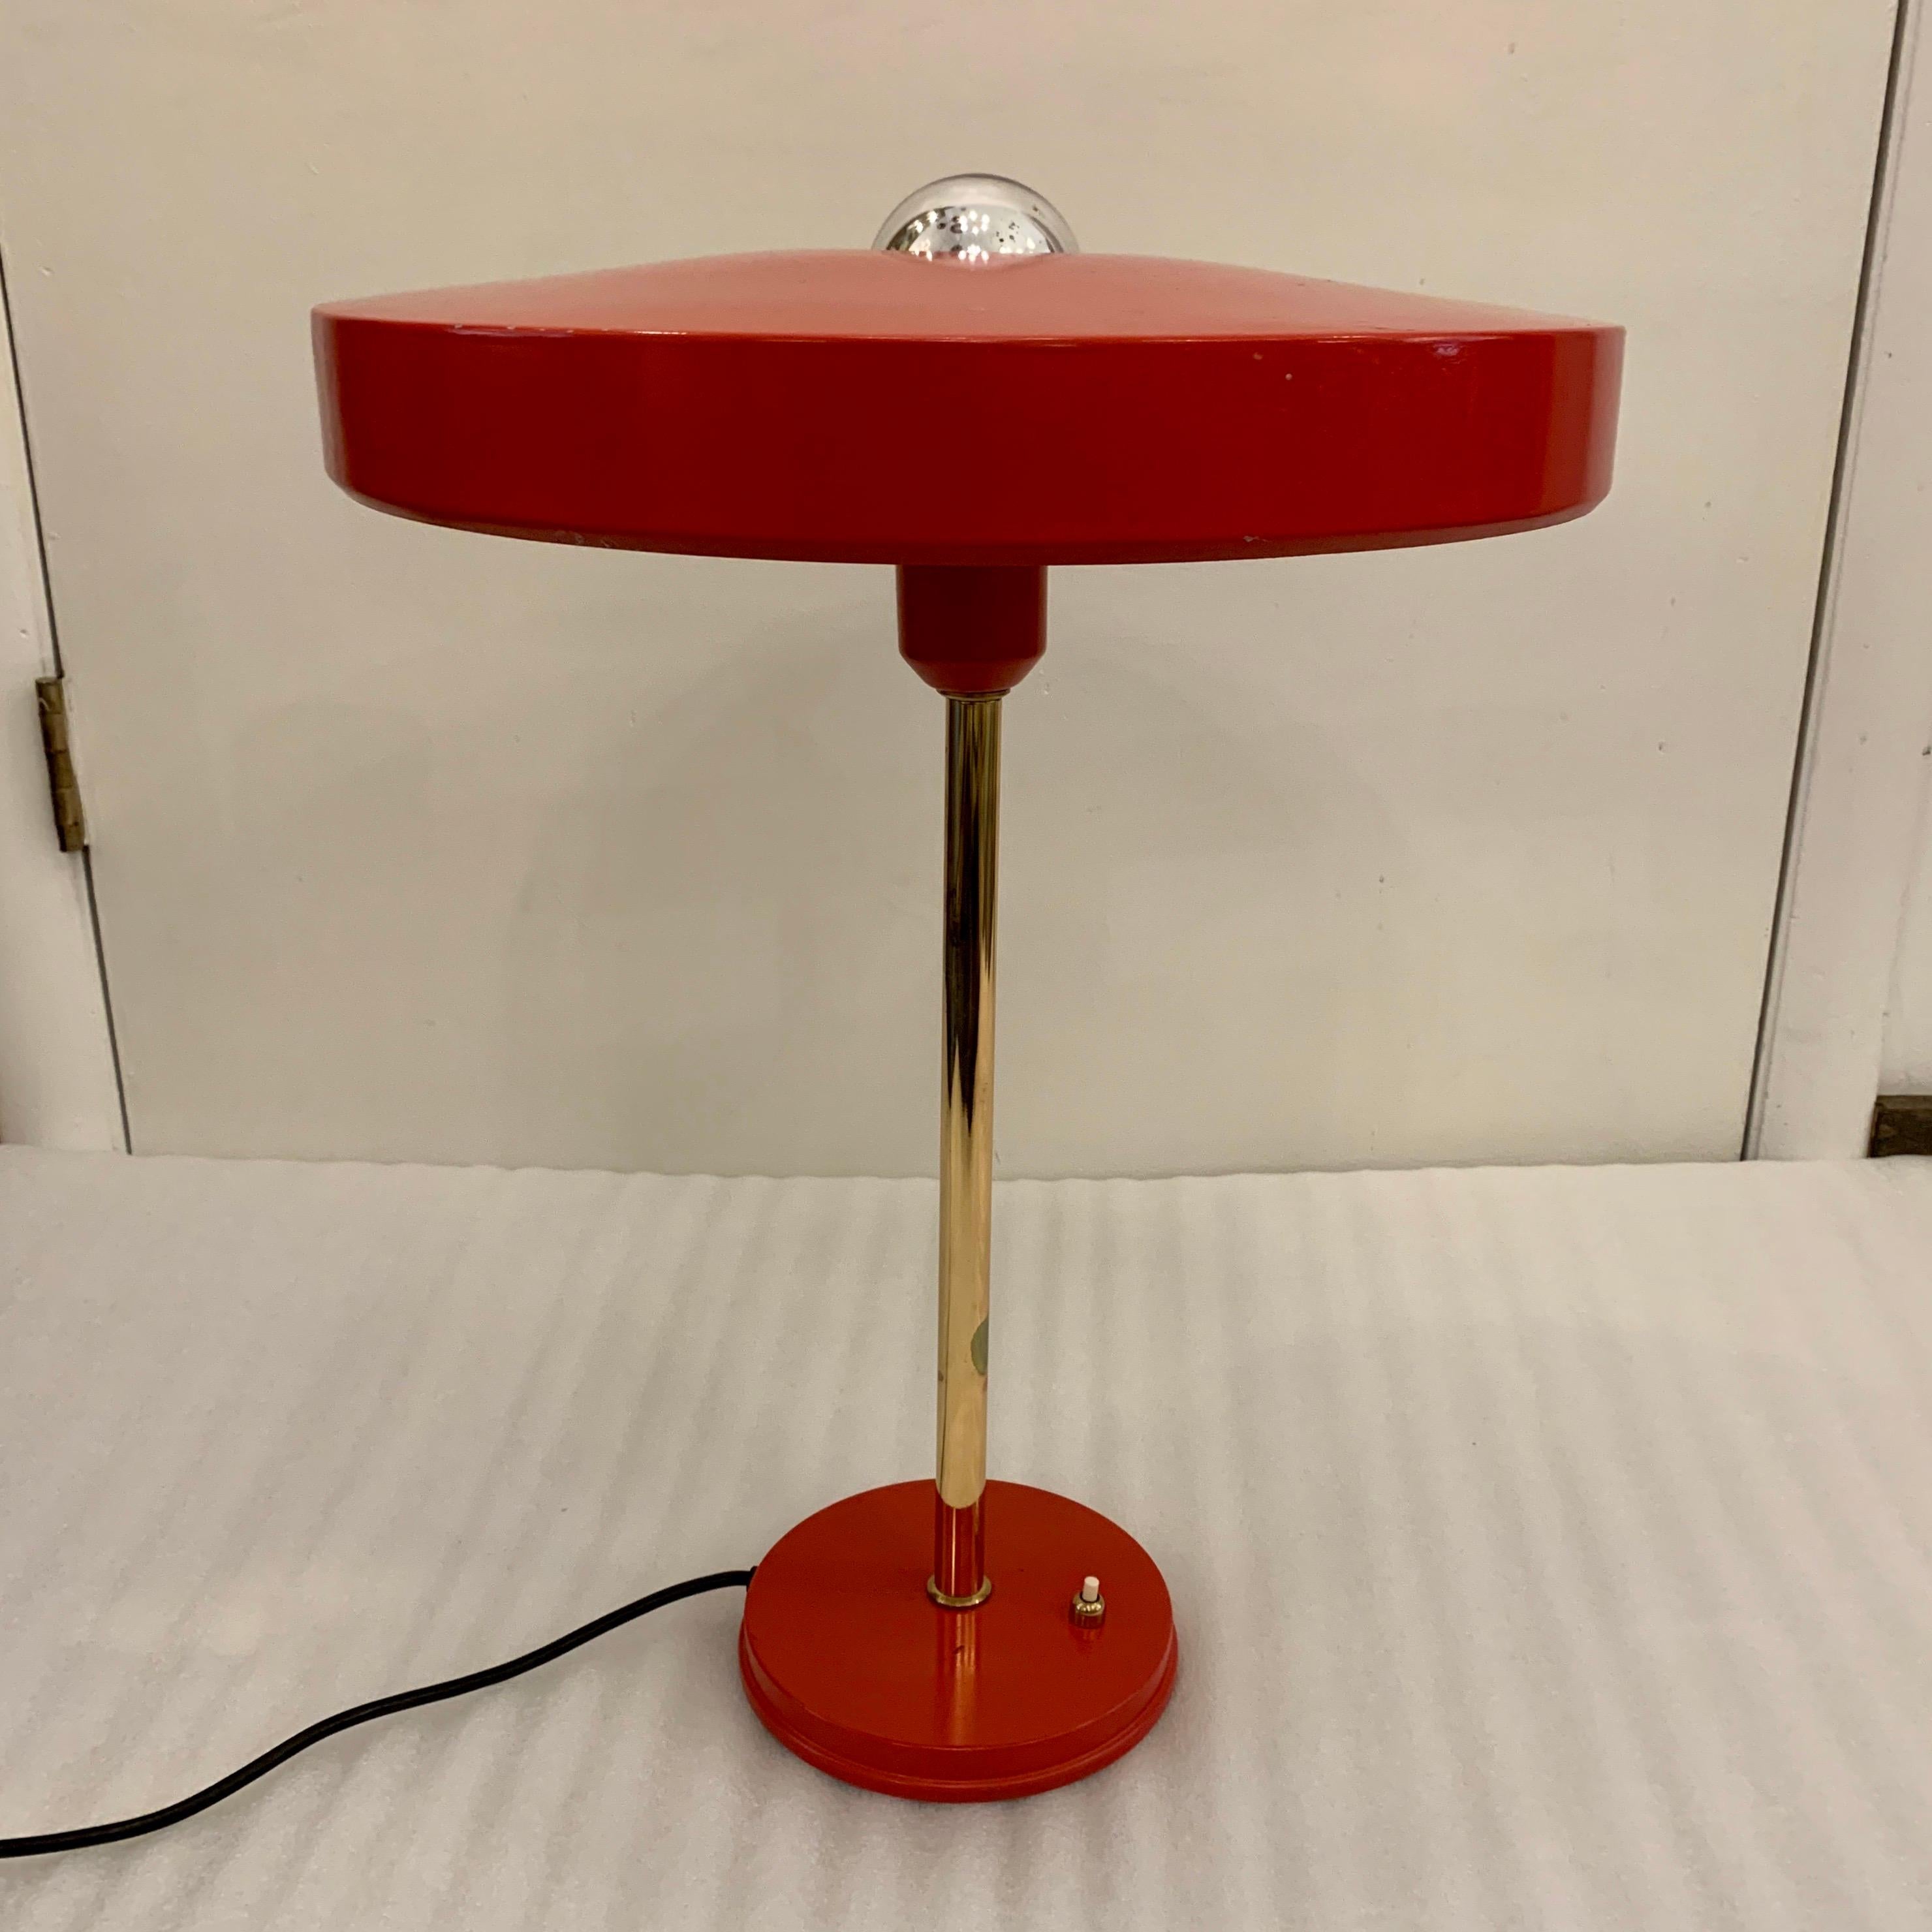 ALL original Louis Christiaan Kalff for Philips red table lamp, 1950s. Featuring round red enameled shade, brass stem and round 6 inch diameter base with original base switch. Shown with mercury bulb and Stamped by famed Dutch manufacturer, Philips.